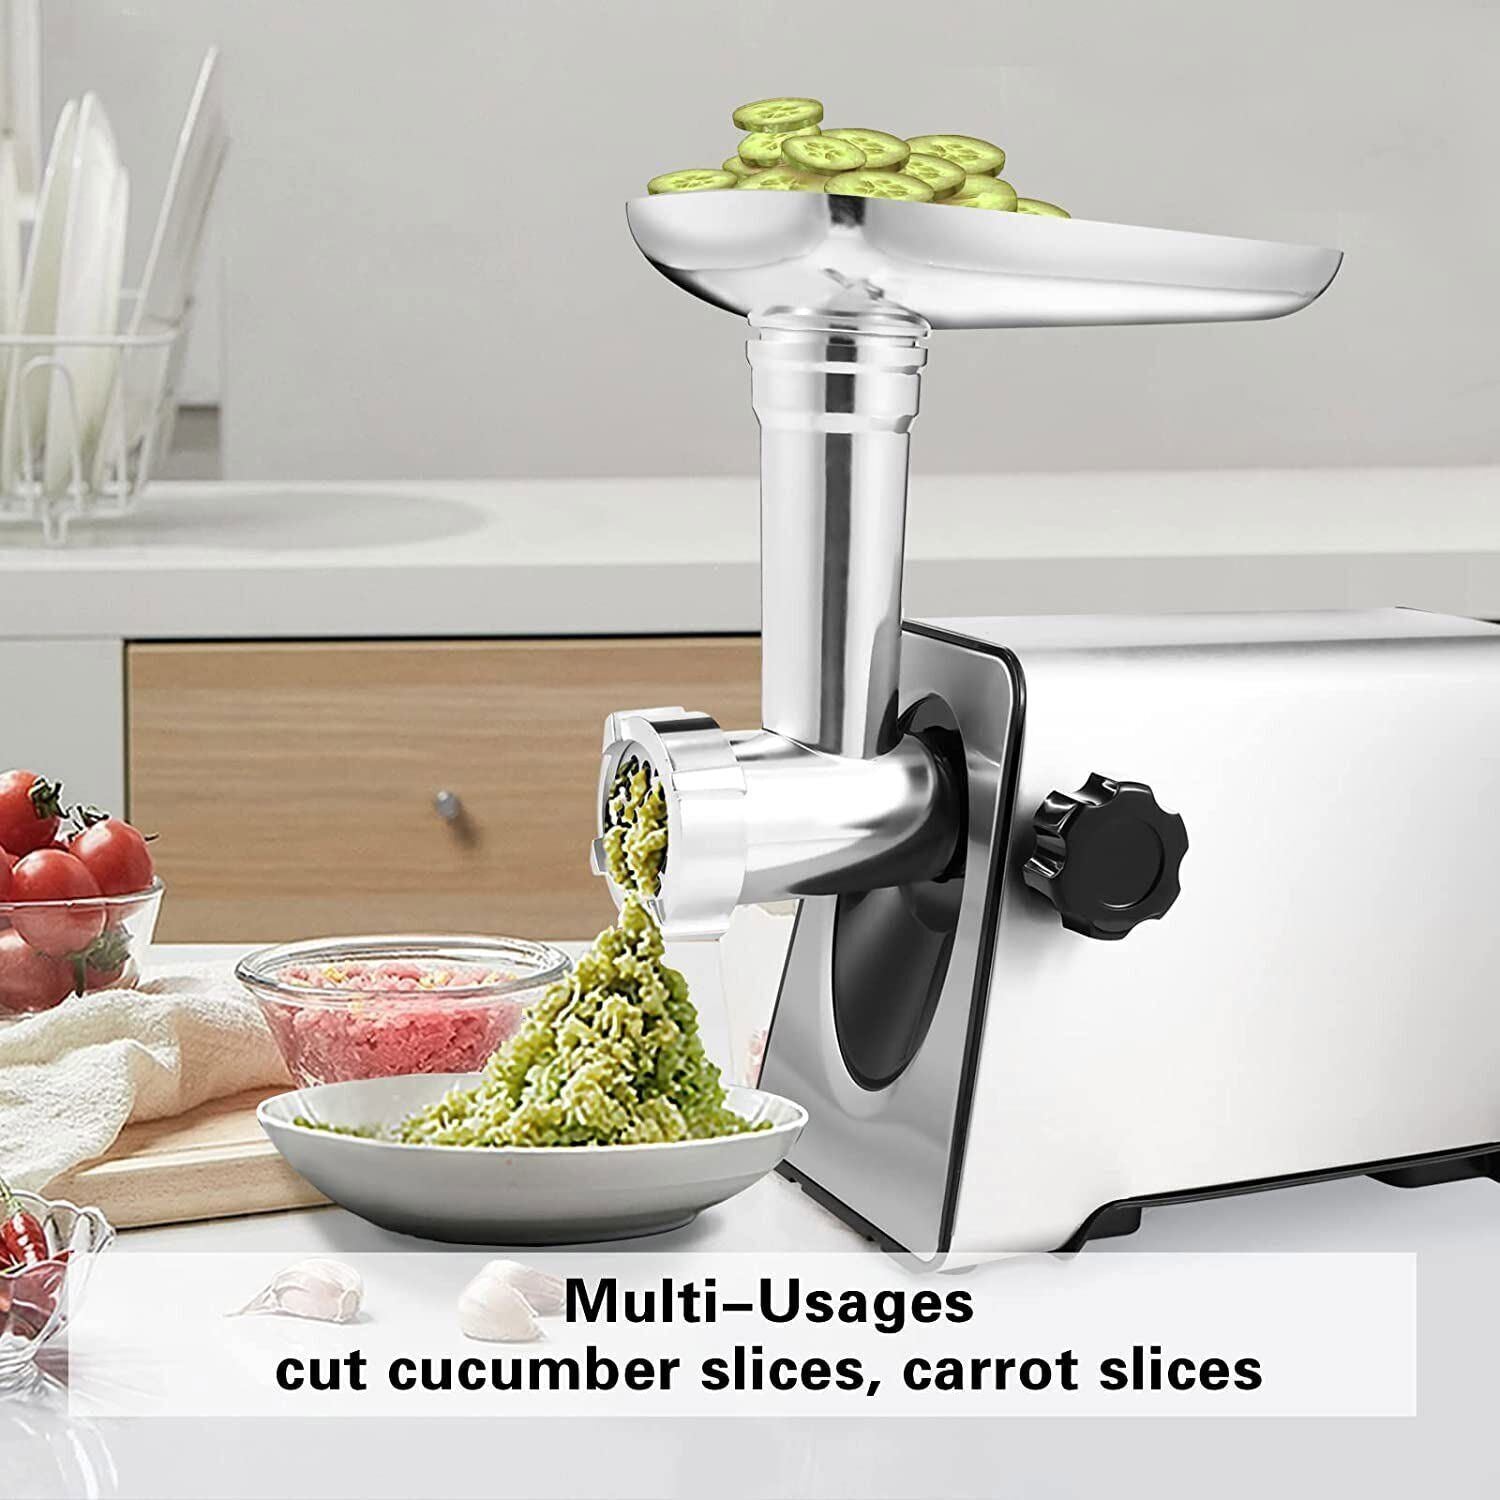 A Simple Deluxe Electric Meat Grinder with meat and other ingredients.